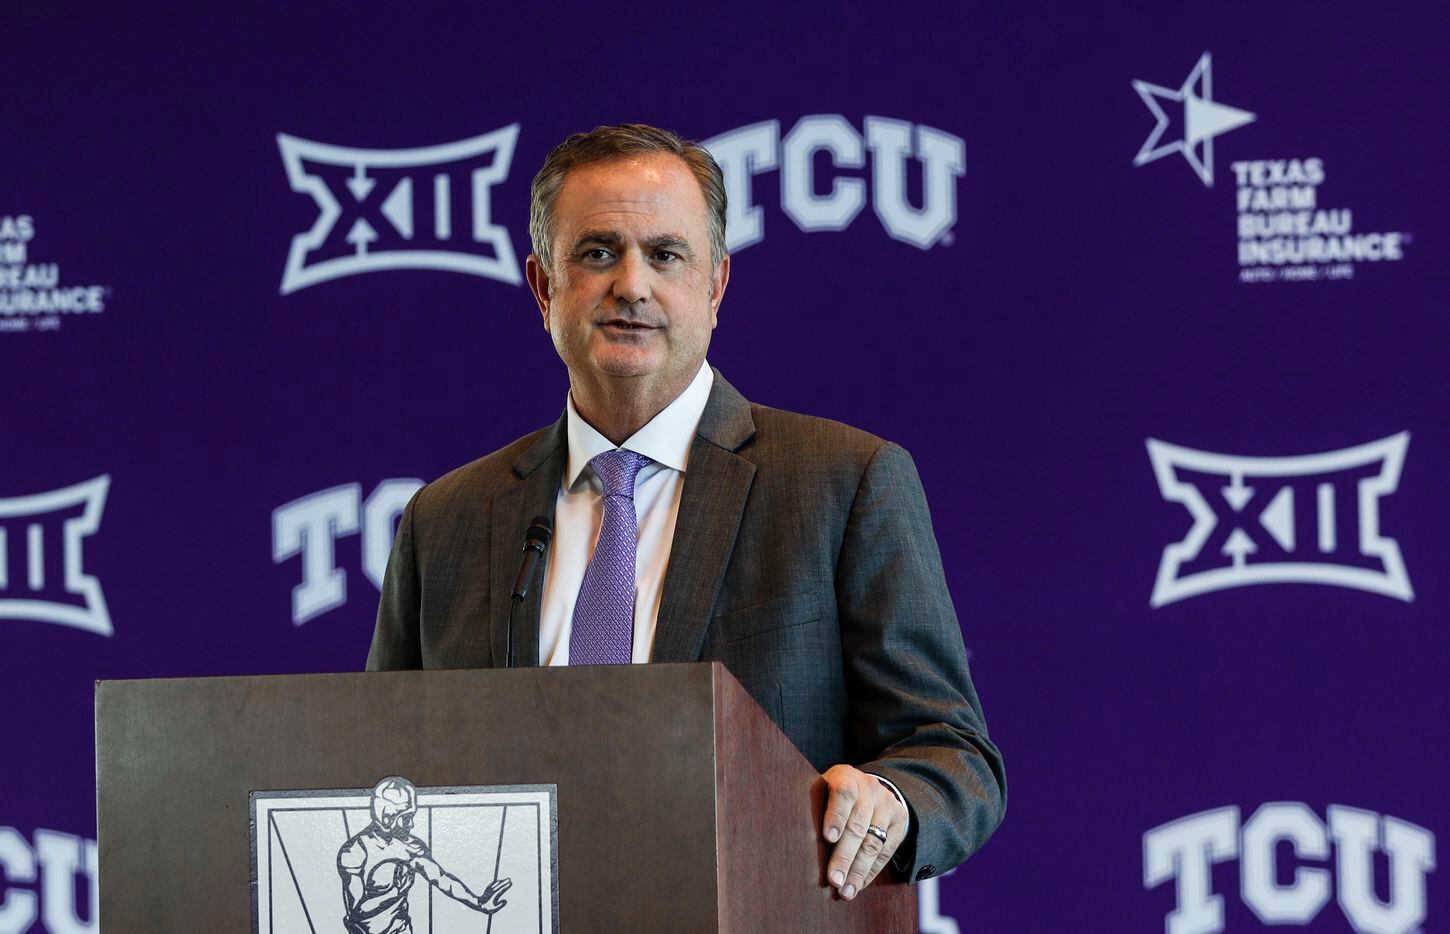 Texas Christian University's head football coach, Sonny Dykes, speaks at a news conference for the first time at Amon G. Carter Stadium in Fort Worth on Tuesday, Nov. 30, 2021. Dykes was formerly introduced as the new head coach of Texas Christian University's football team during the news conference.